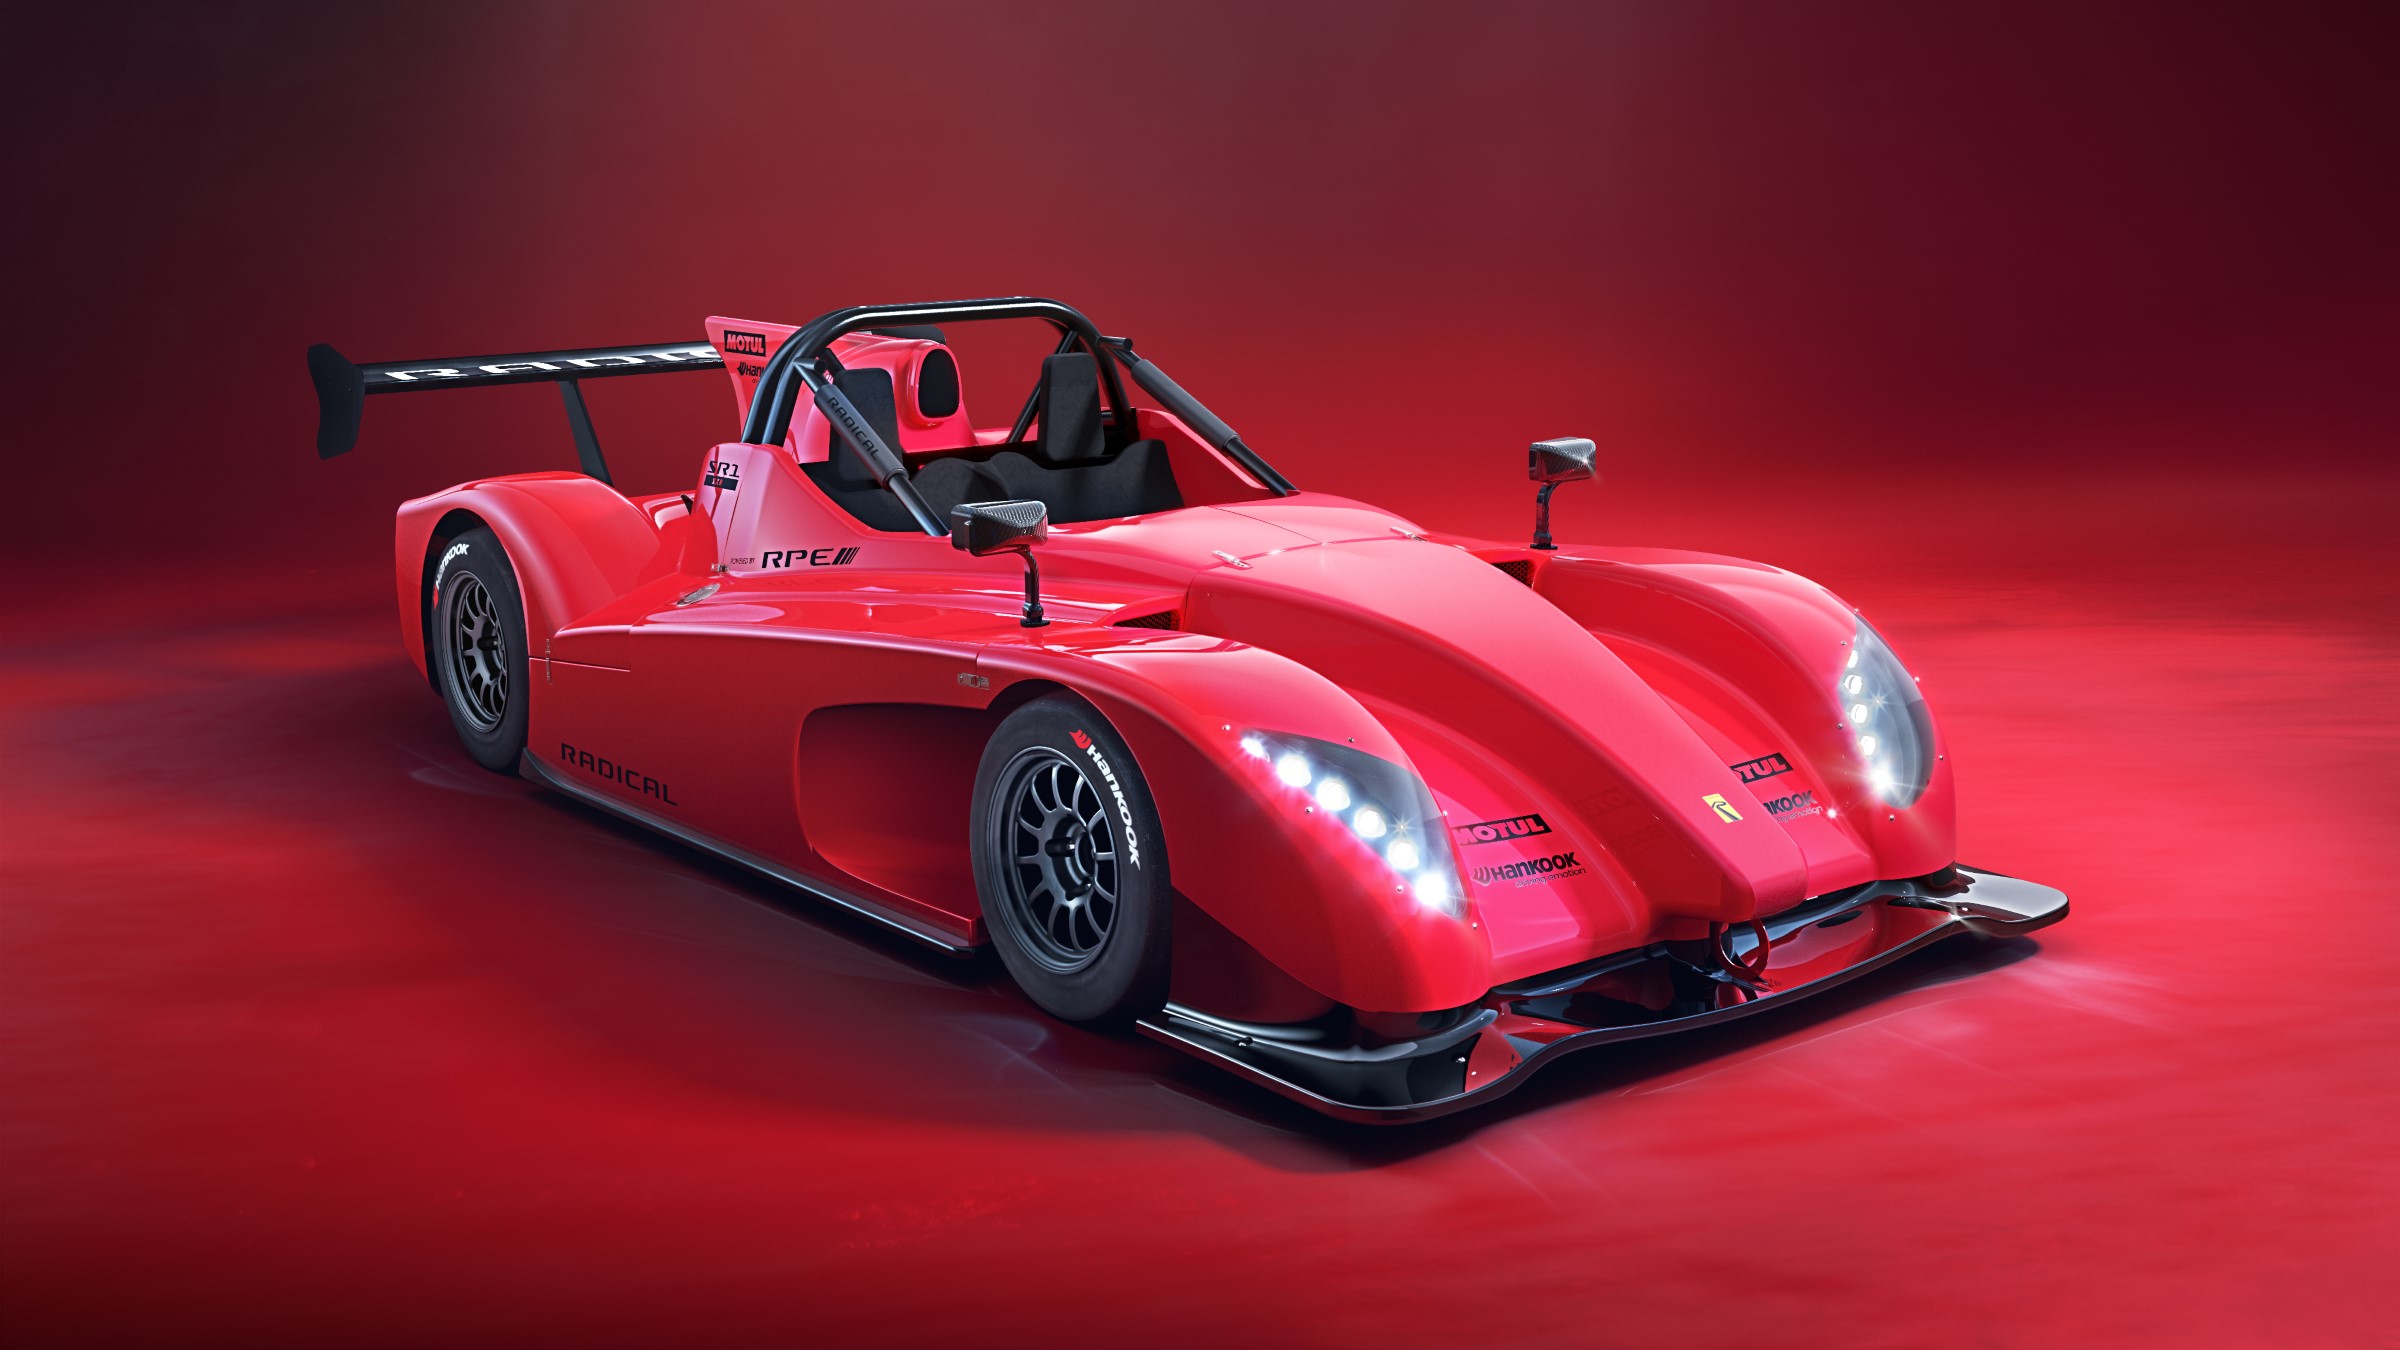 Radical revamps its entry-level racer with new SR1 XXR